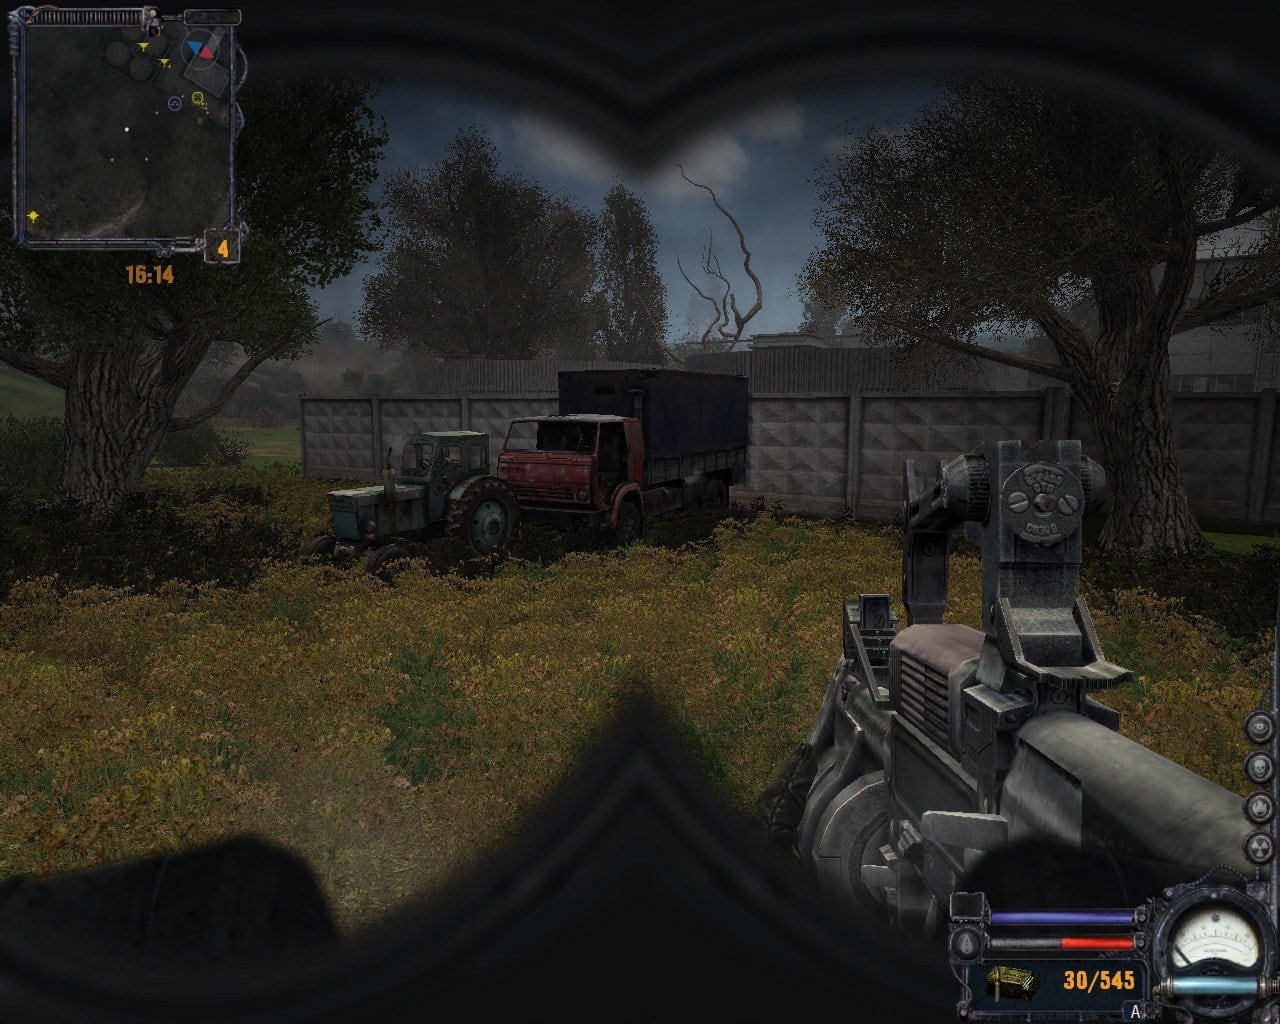 Stalker clear sky 1.5 10. Сталкер Clear Sky Remake. S.T.A.L.K.E.R.: чистое небо (2008). Сталкер чистое небо 1.5.06. Змеелов чистое небо.